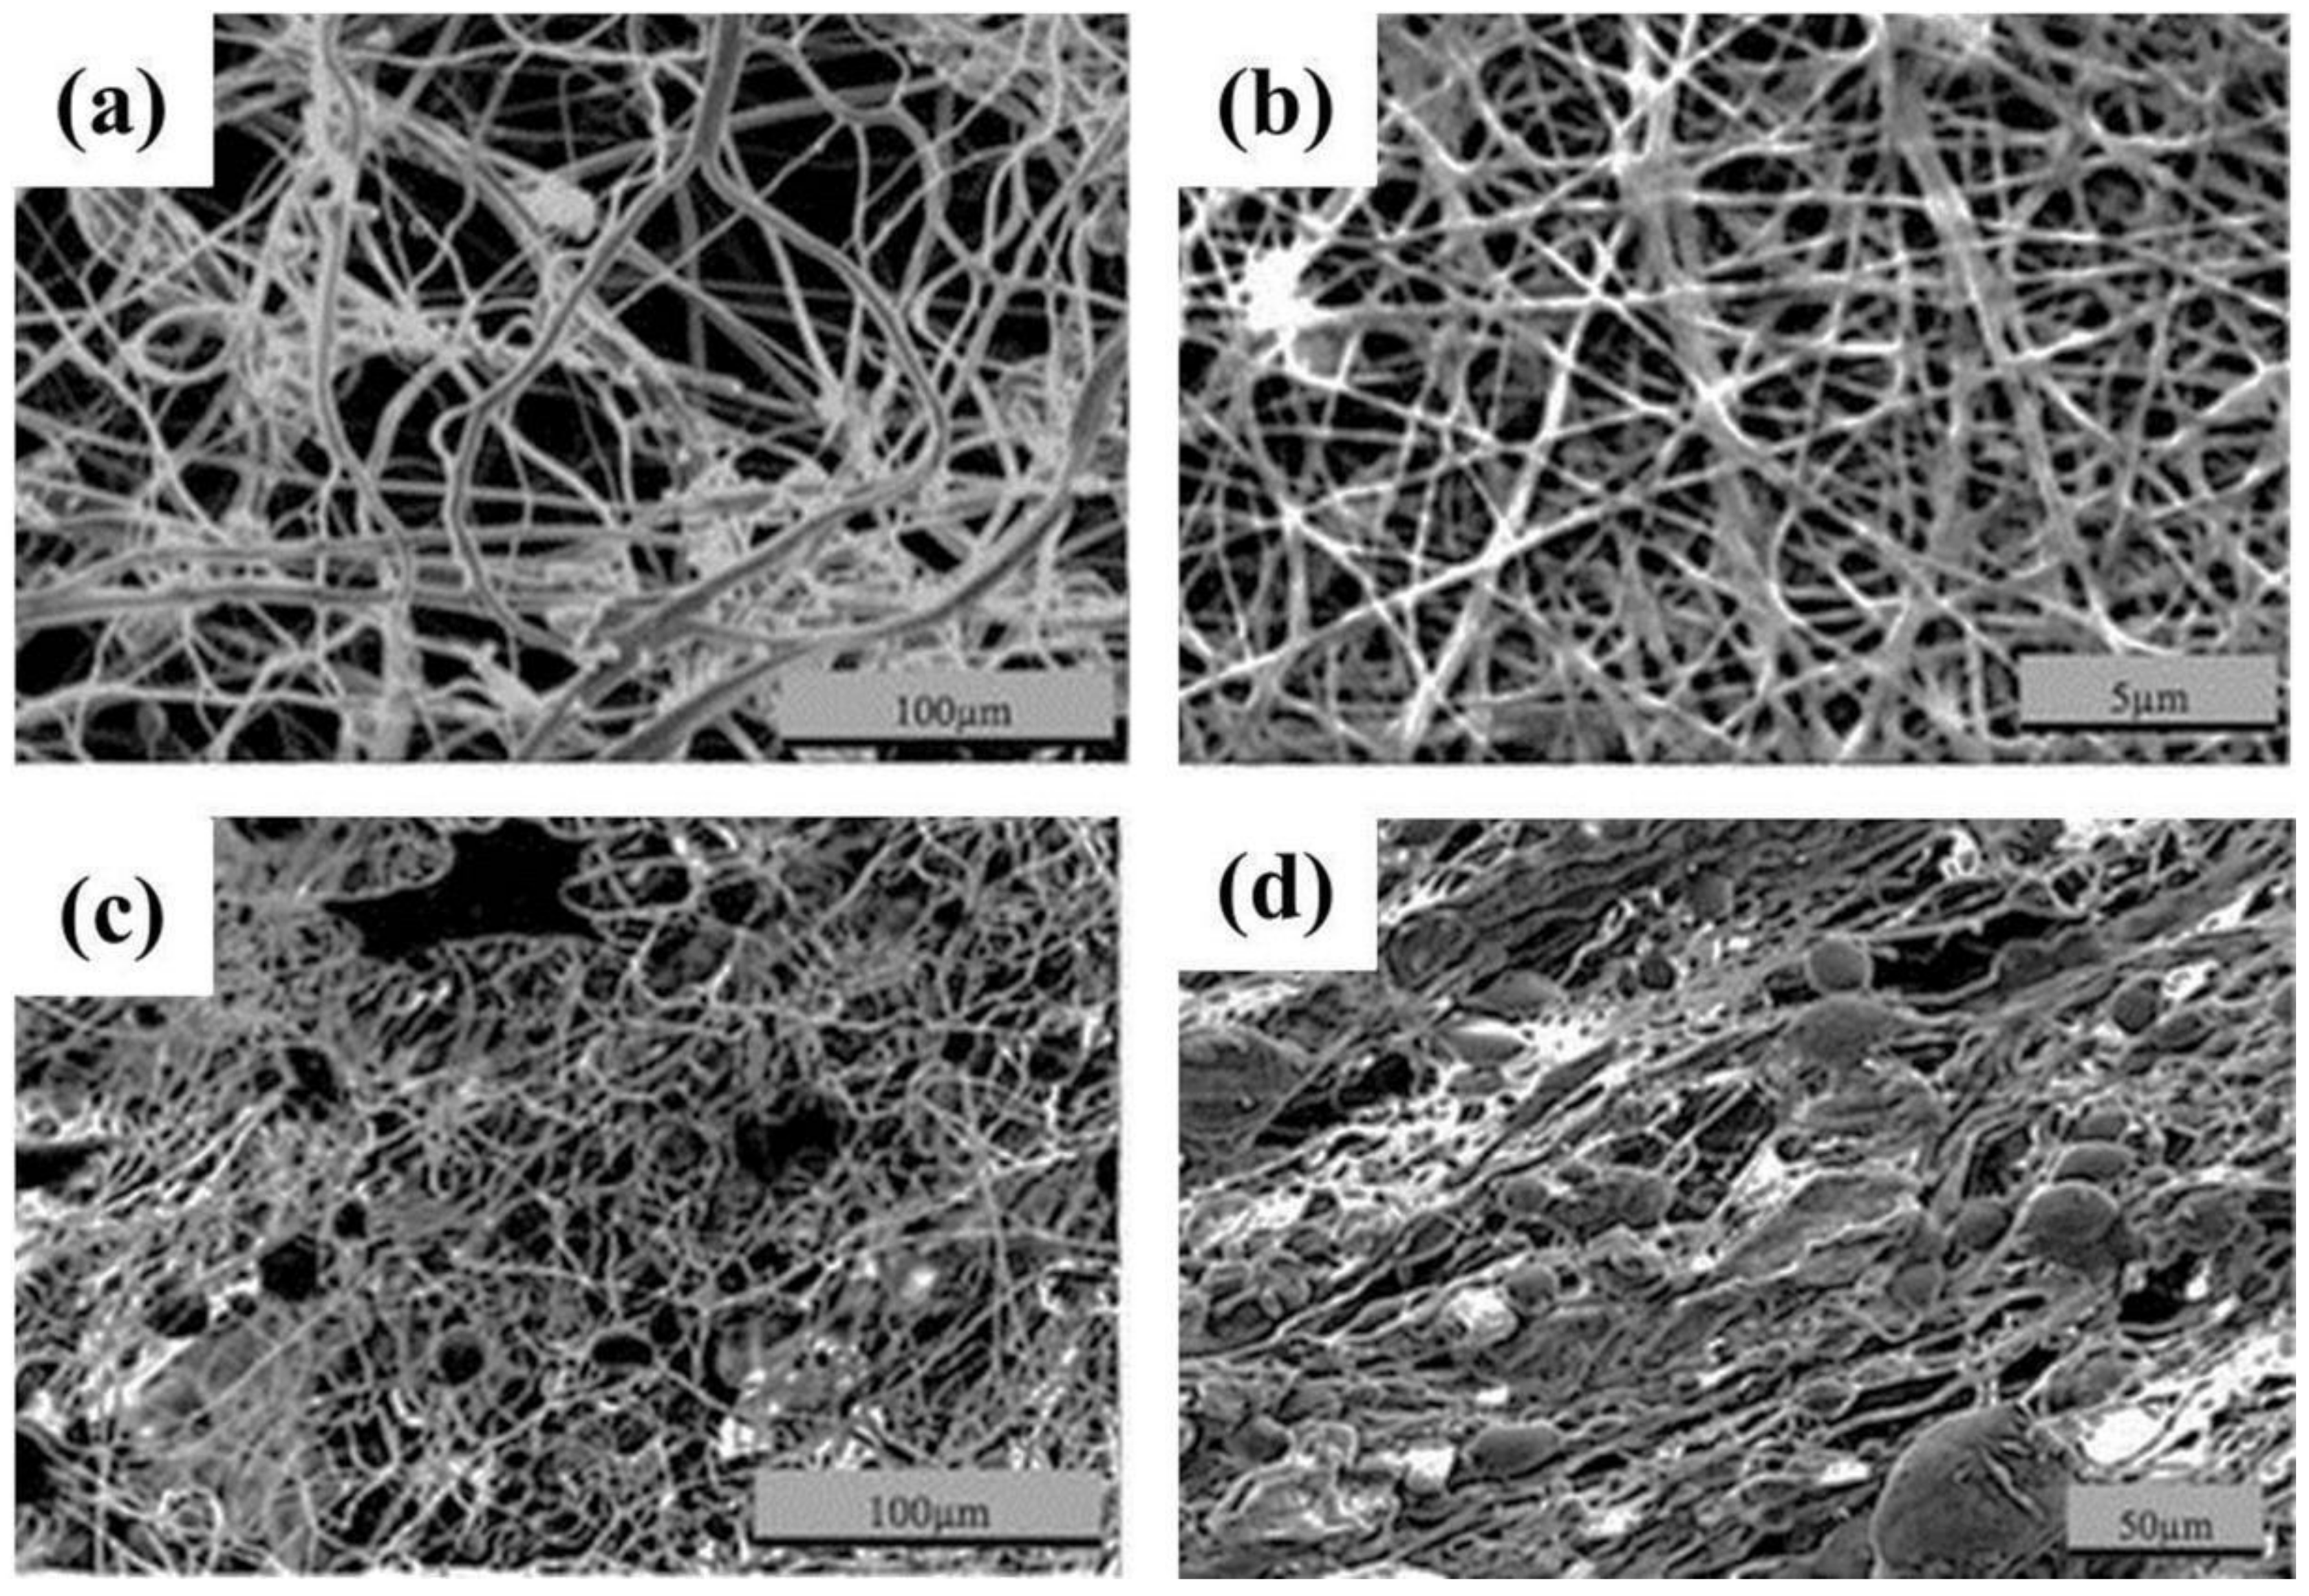 Fibers Free Full Text A Review On Biopolymer Based Fibers Via Electrospinning And Solution Blowing And Their Applications Html